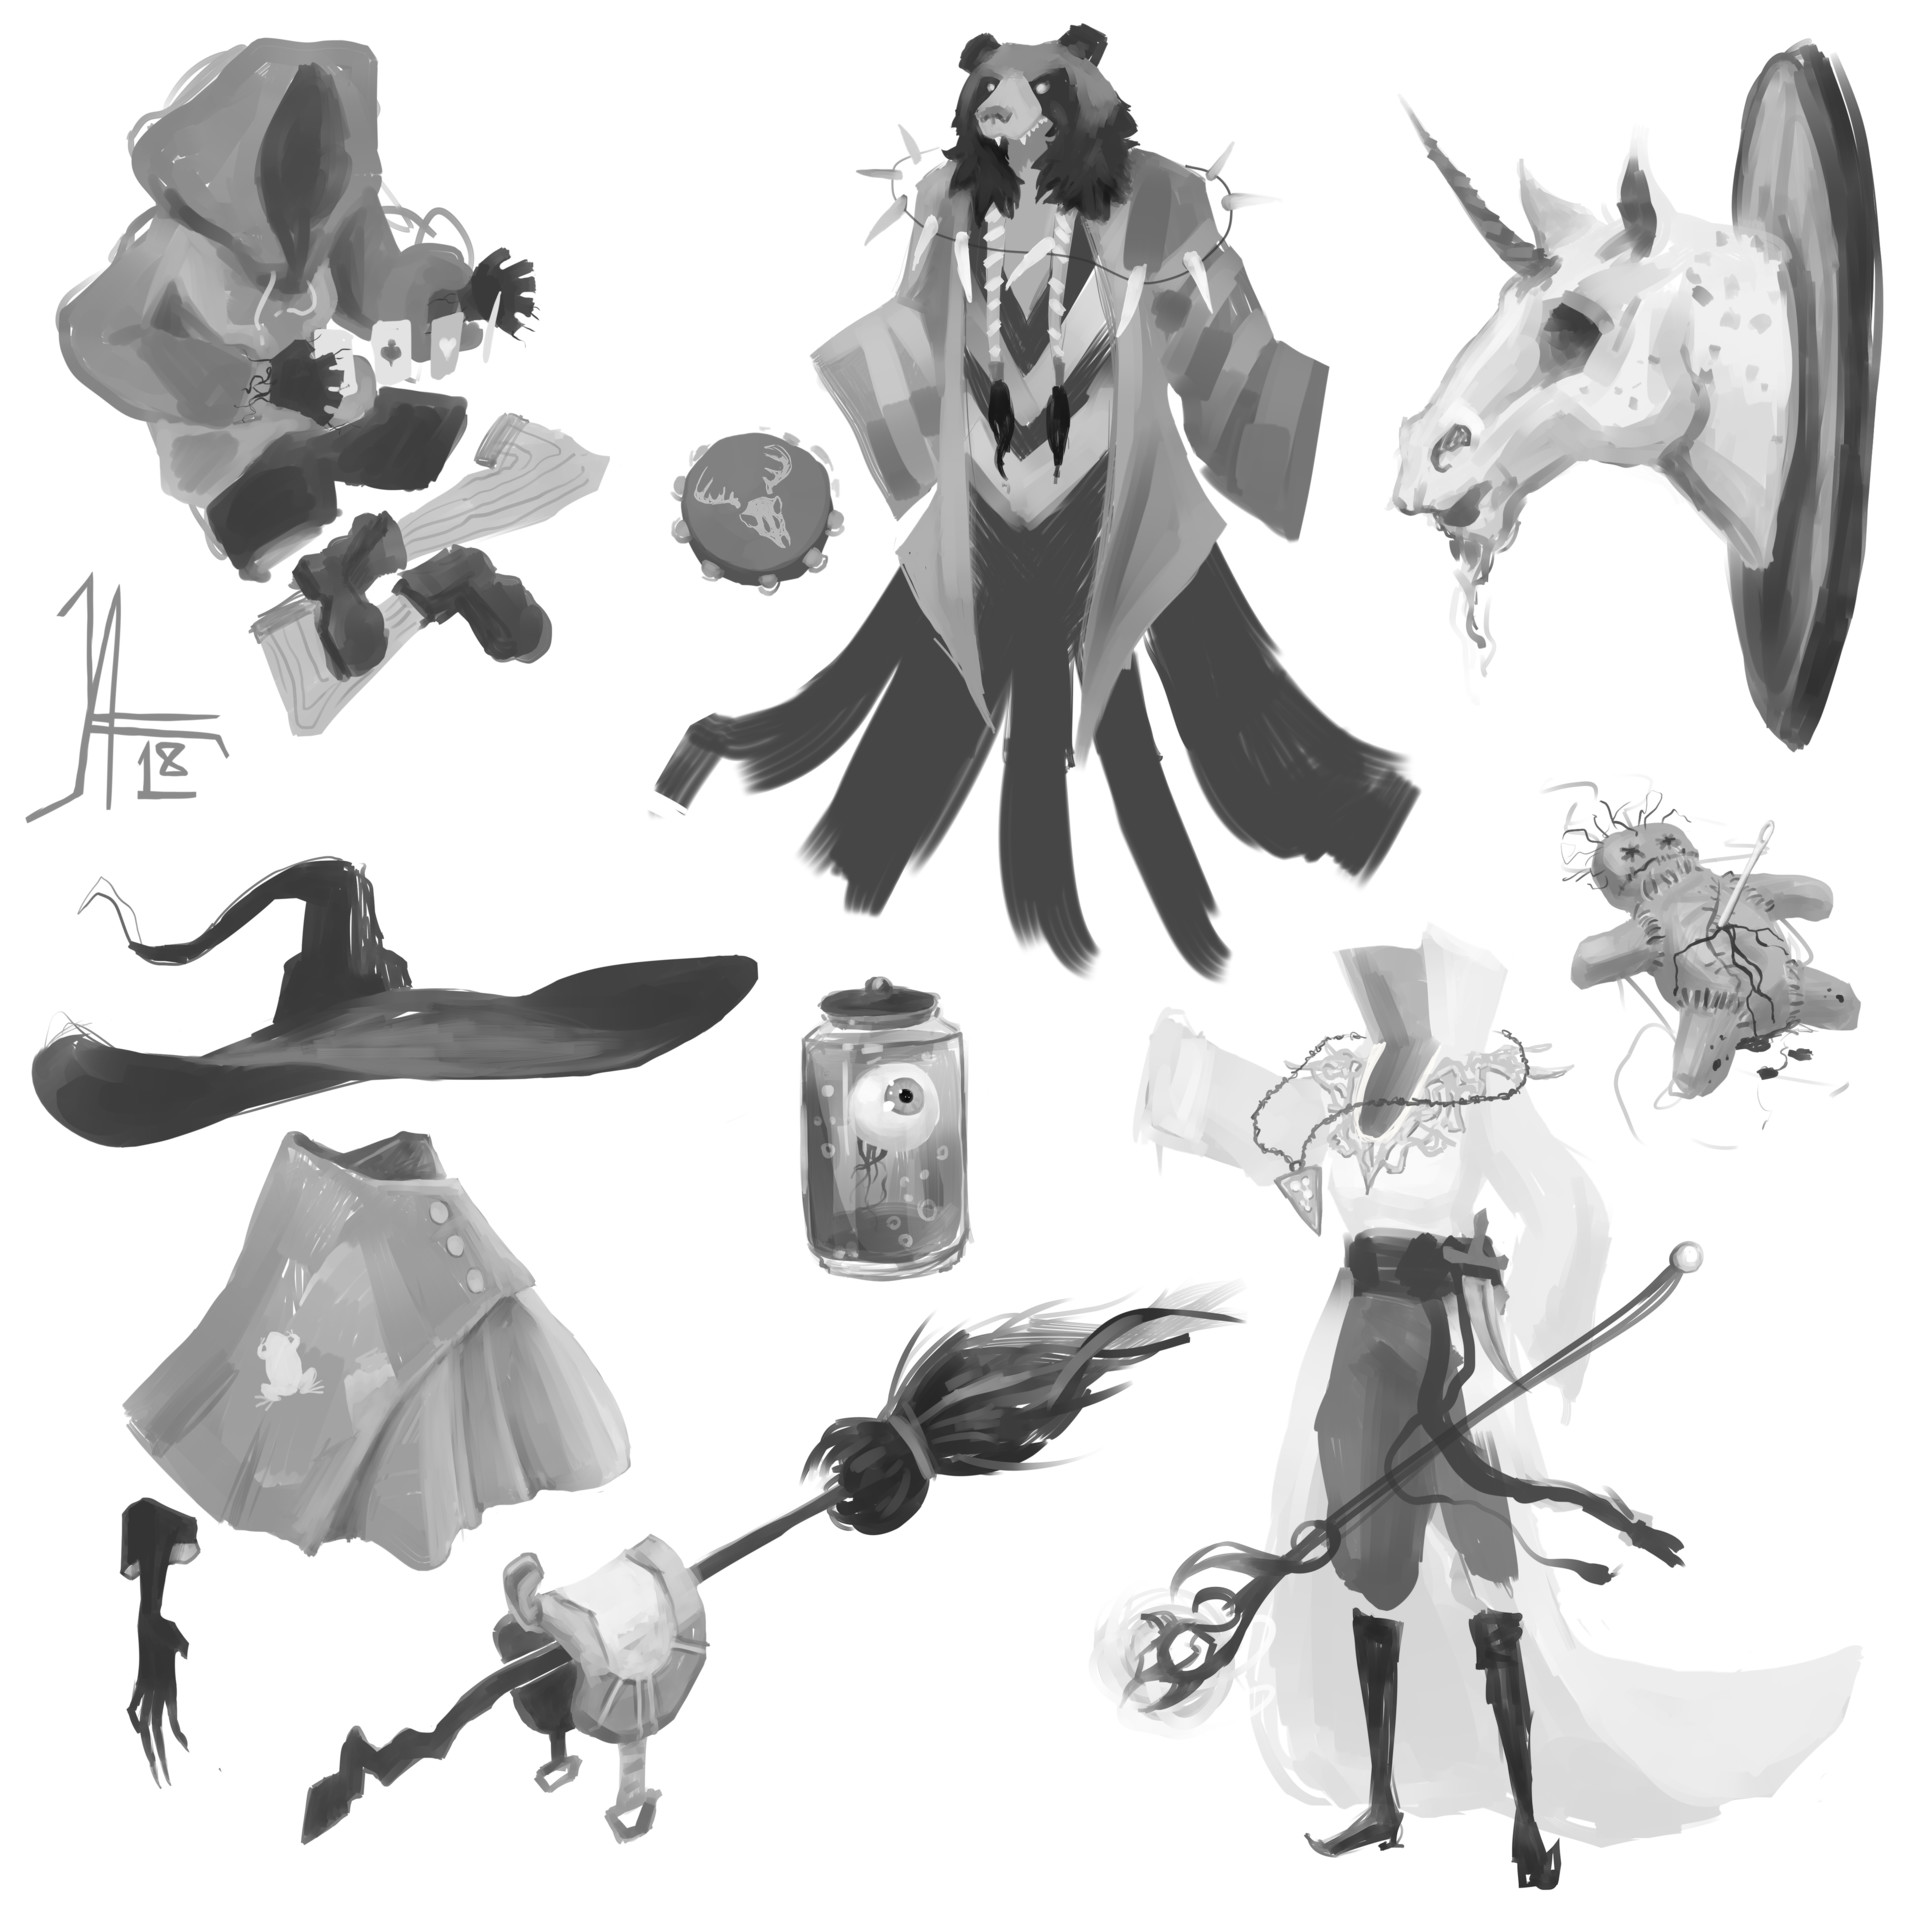 ArtStation - Witch & magician outfits concepts